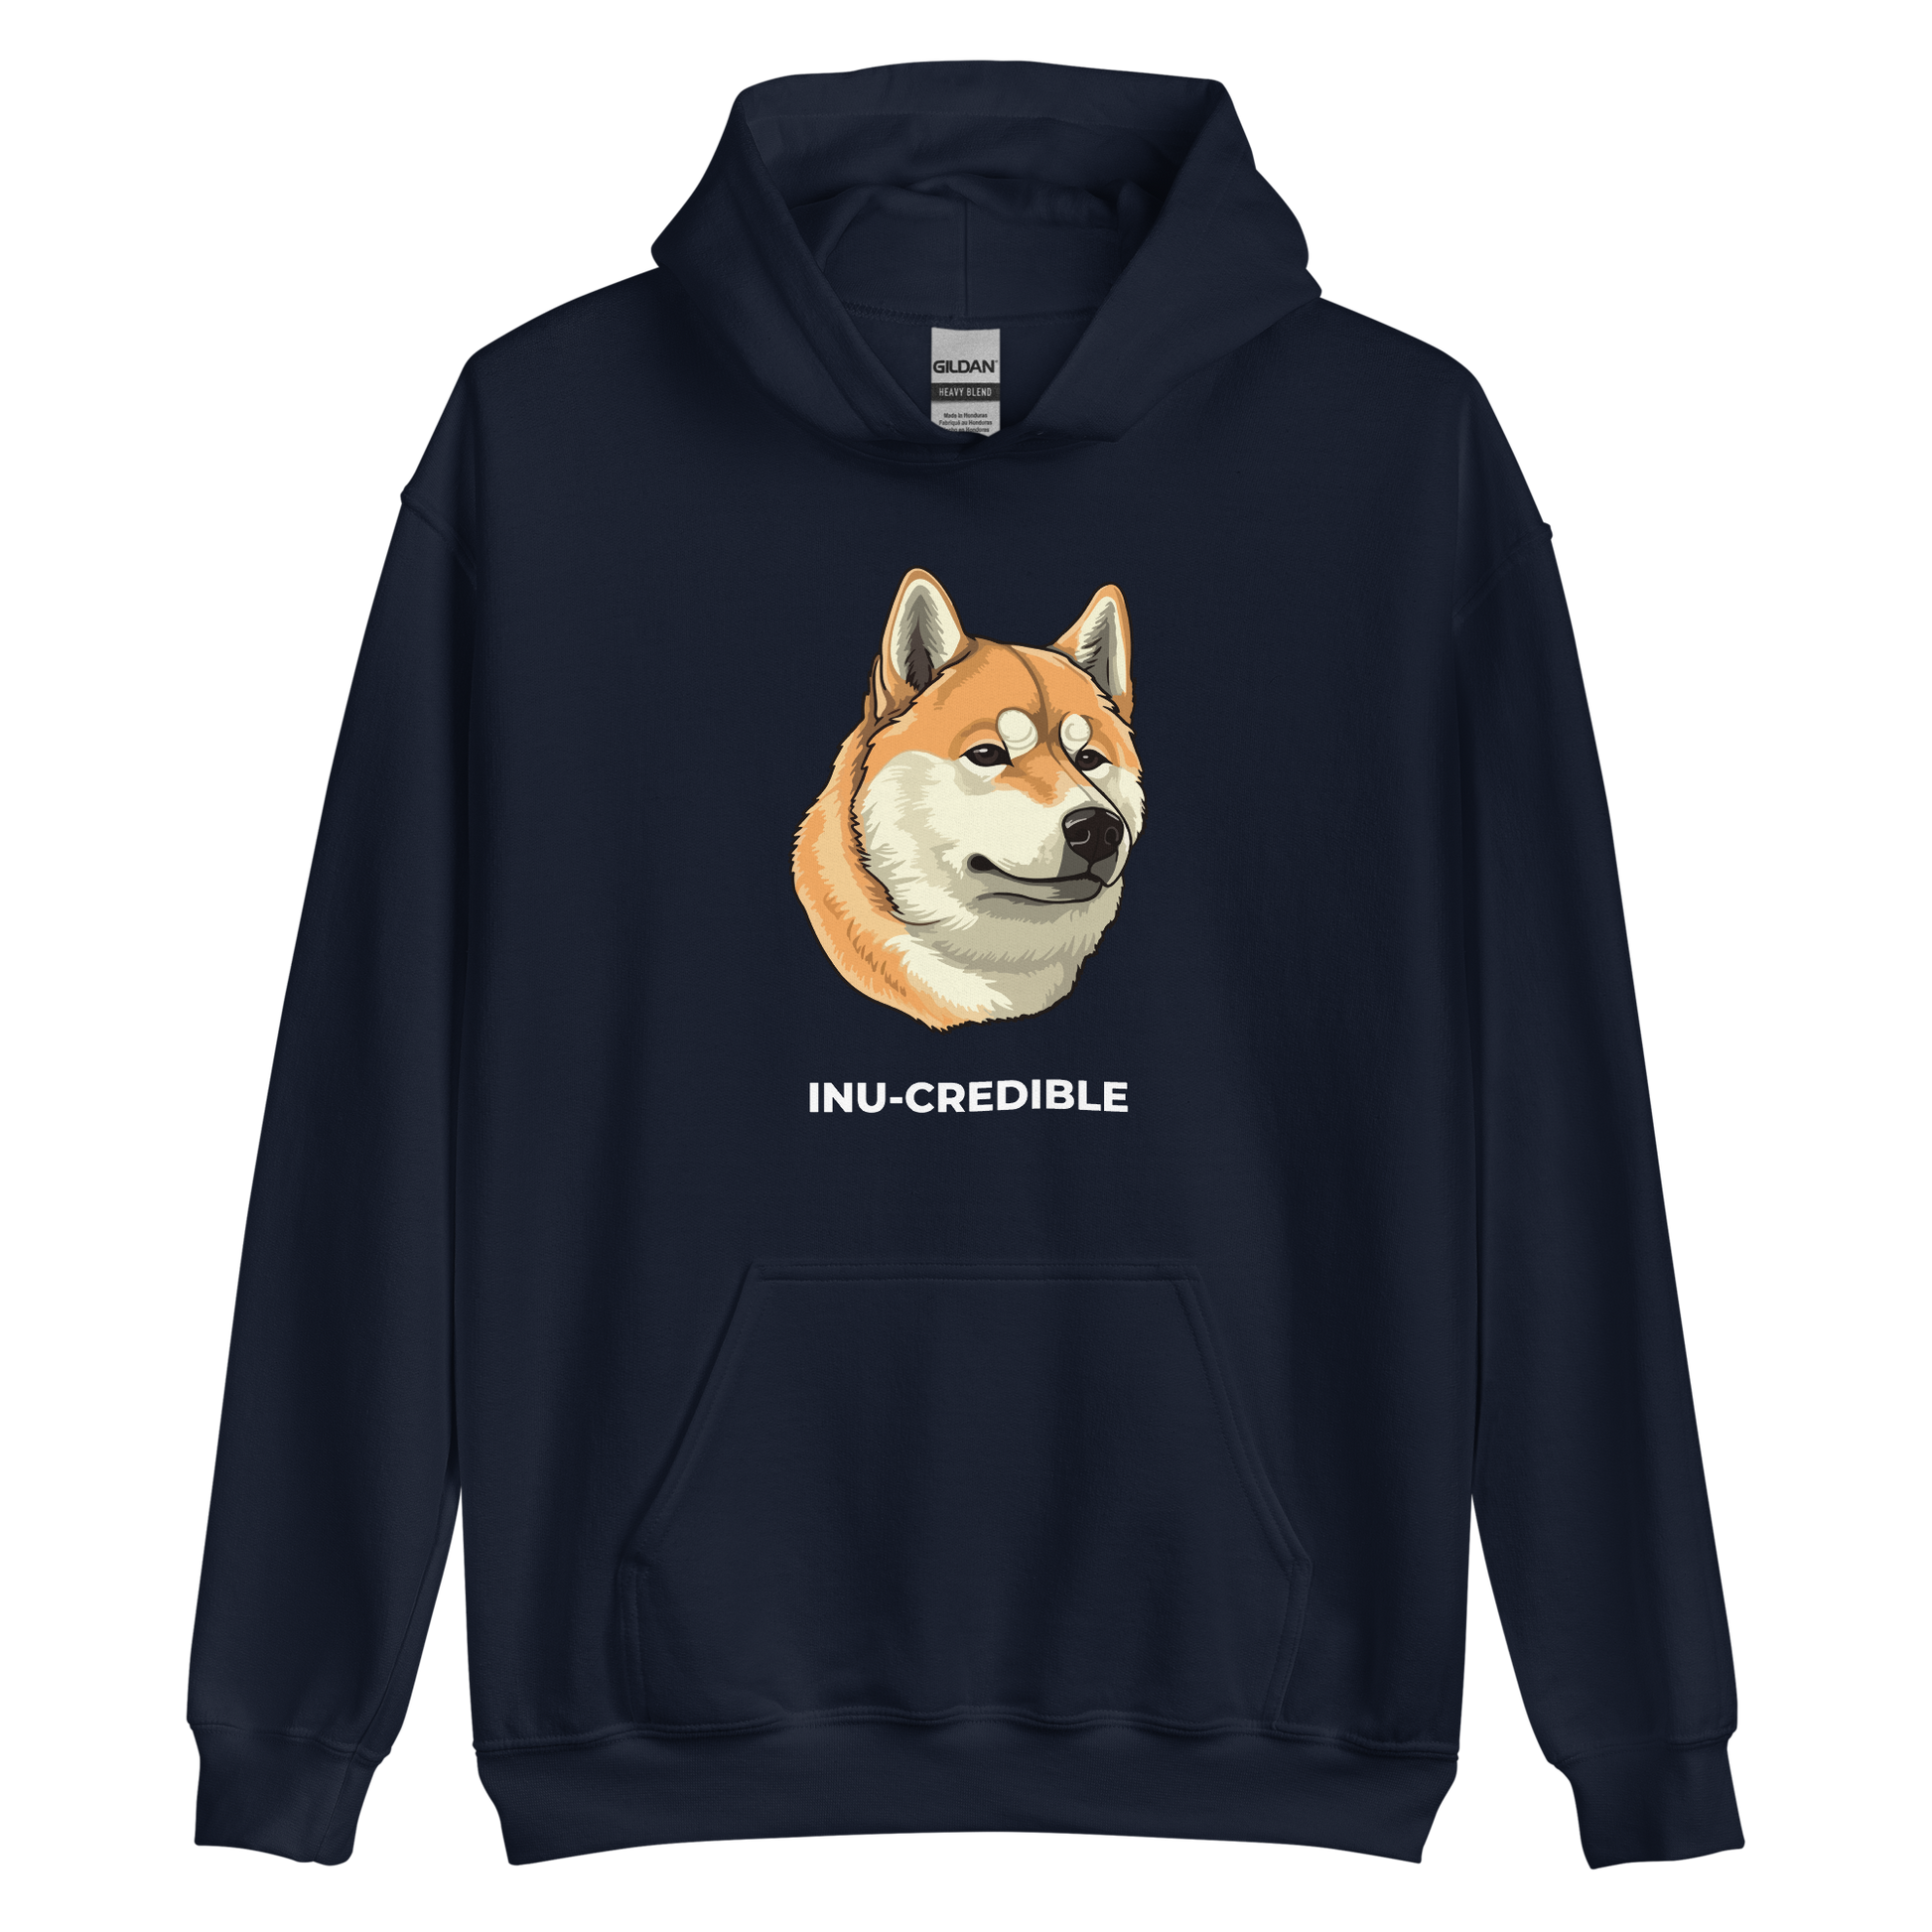 Navy Shiba Inu Hoodie featuring the Inu-Credible graphic on the chest - Funny Graphic Shiba Inu Hoodies - Boozy Fox